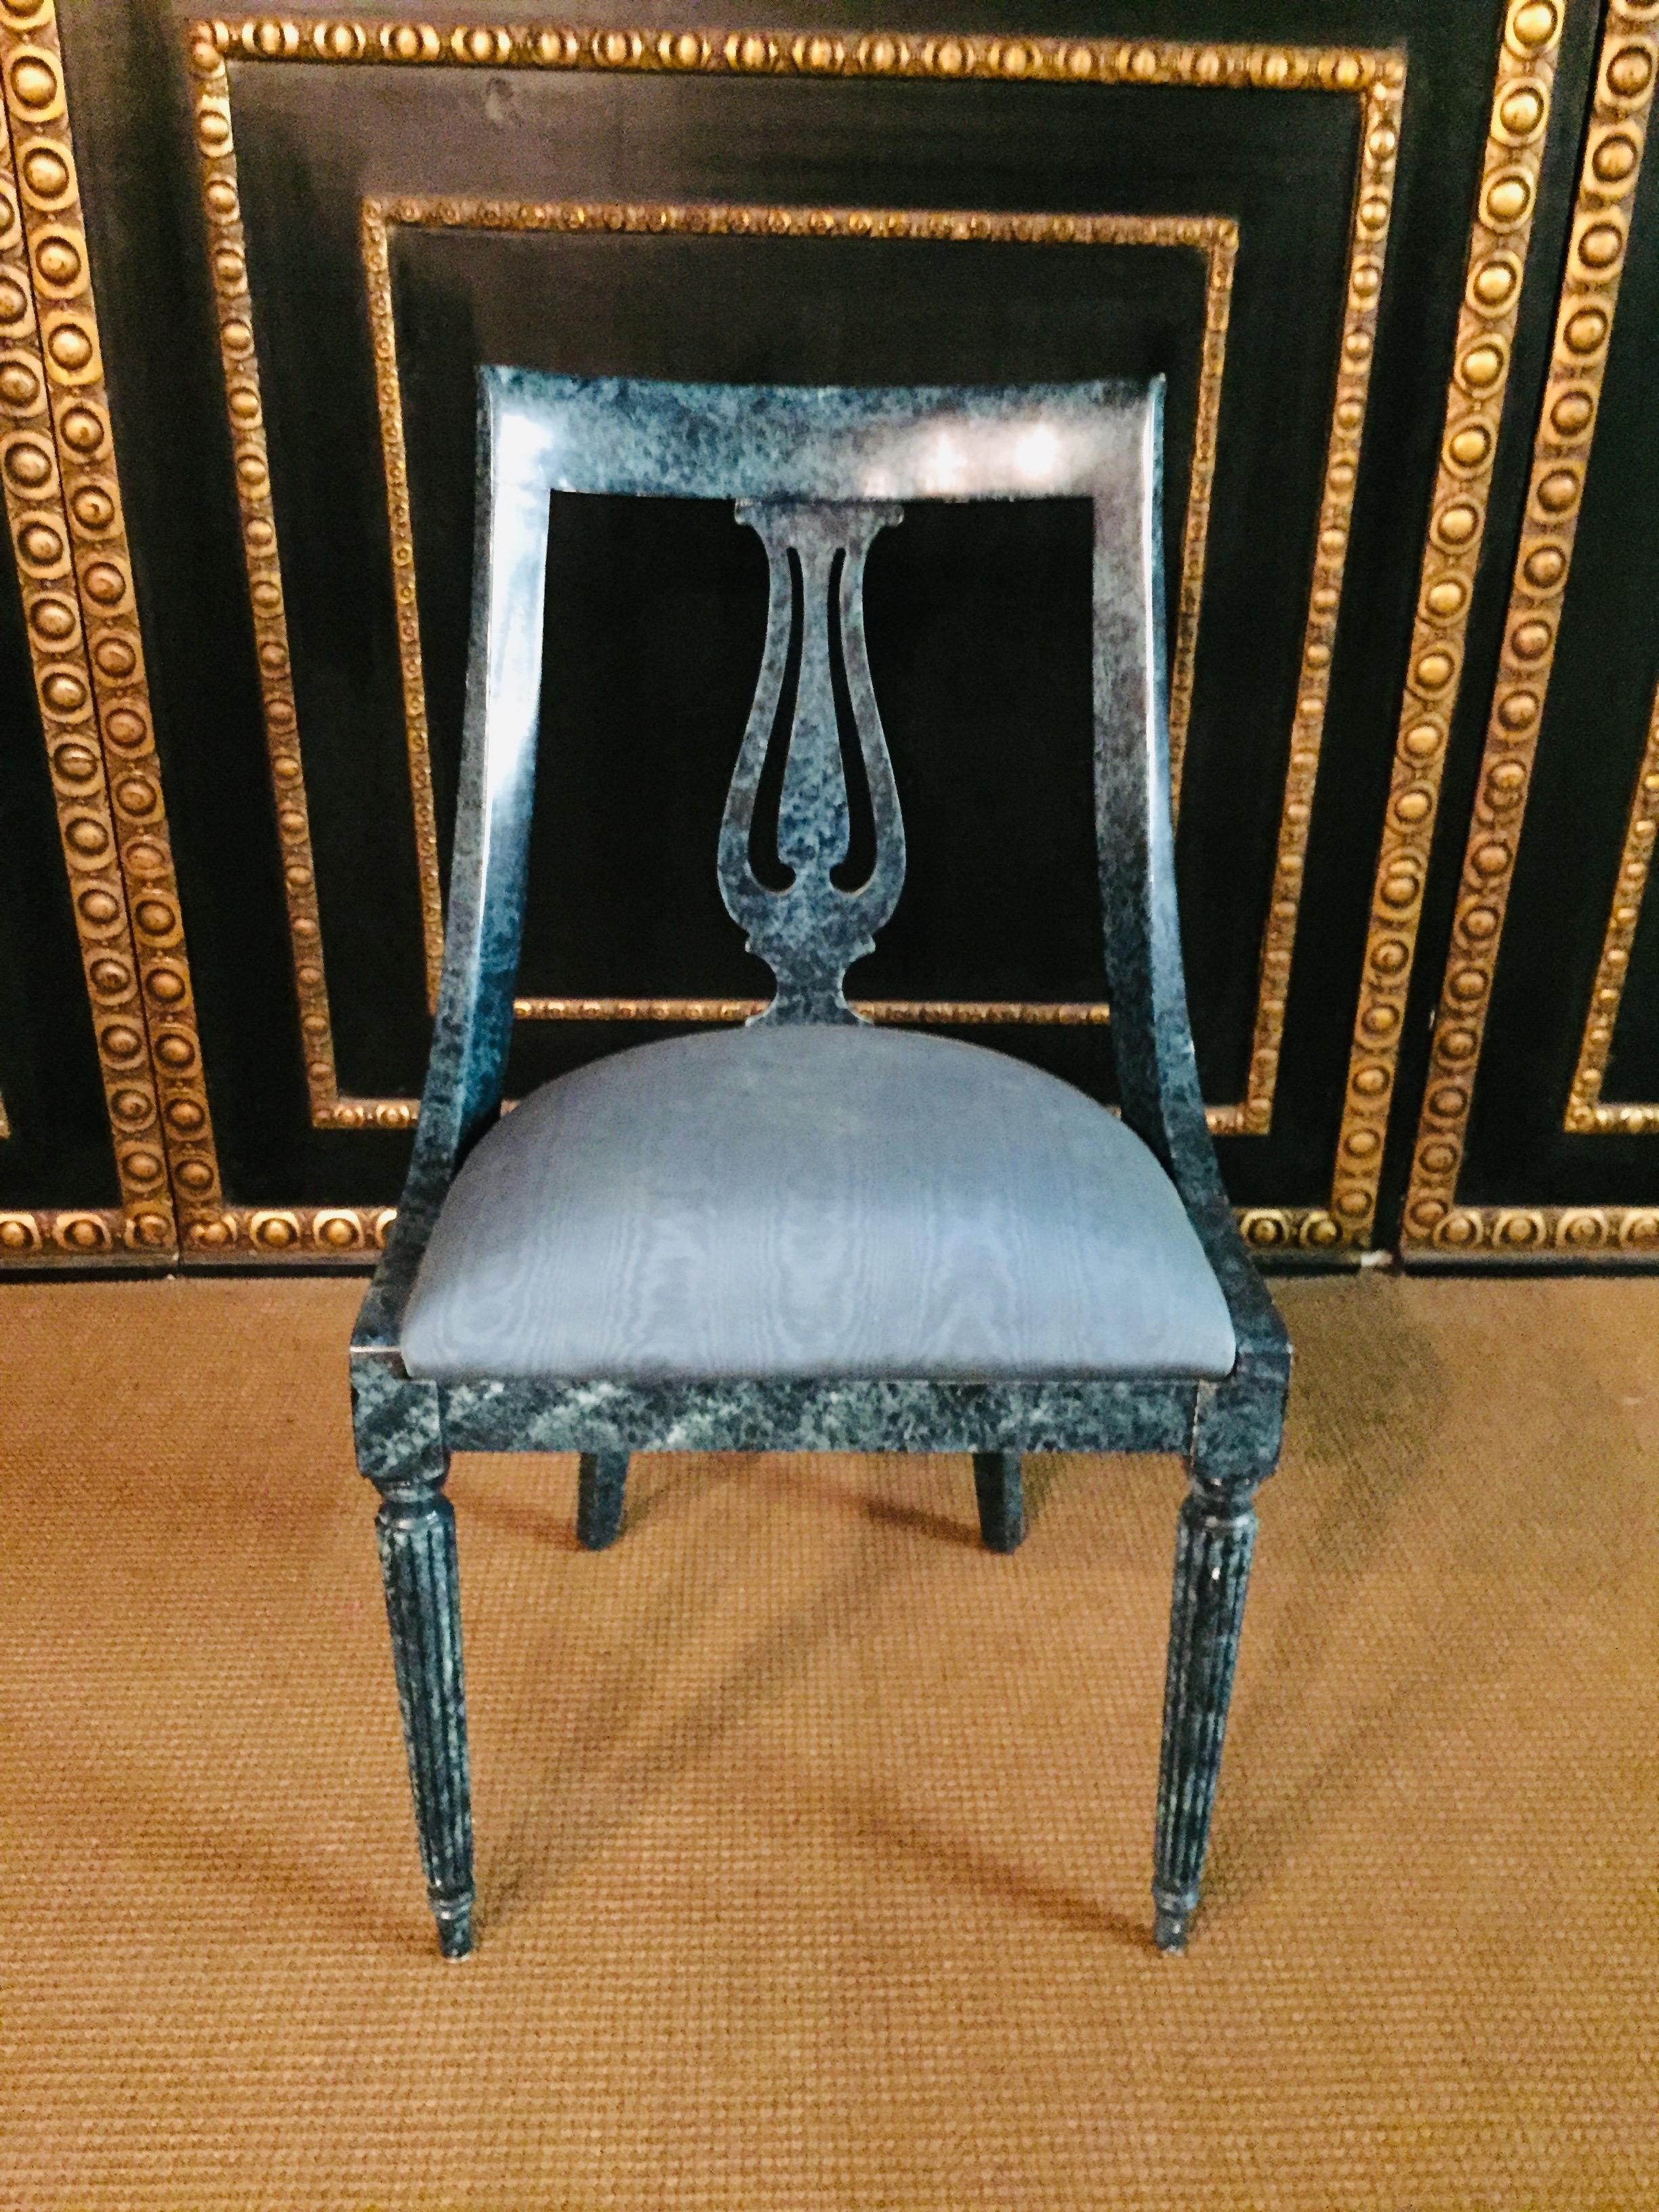 8 Chairs in the Modern Empire Style Turquoise Marbled 1